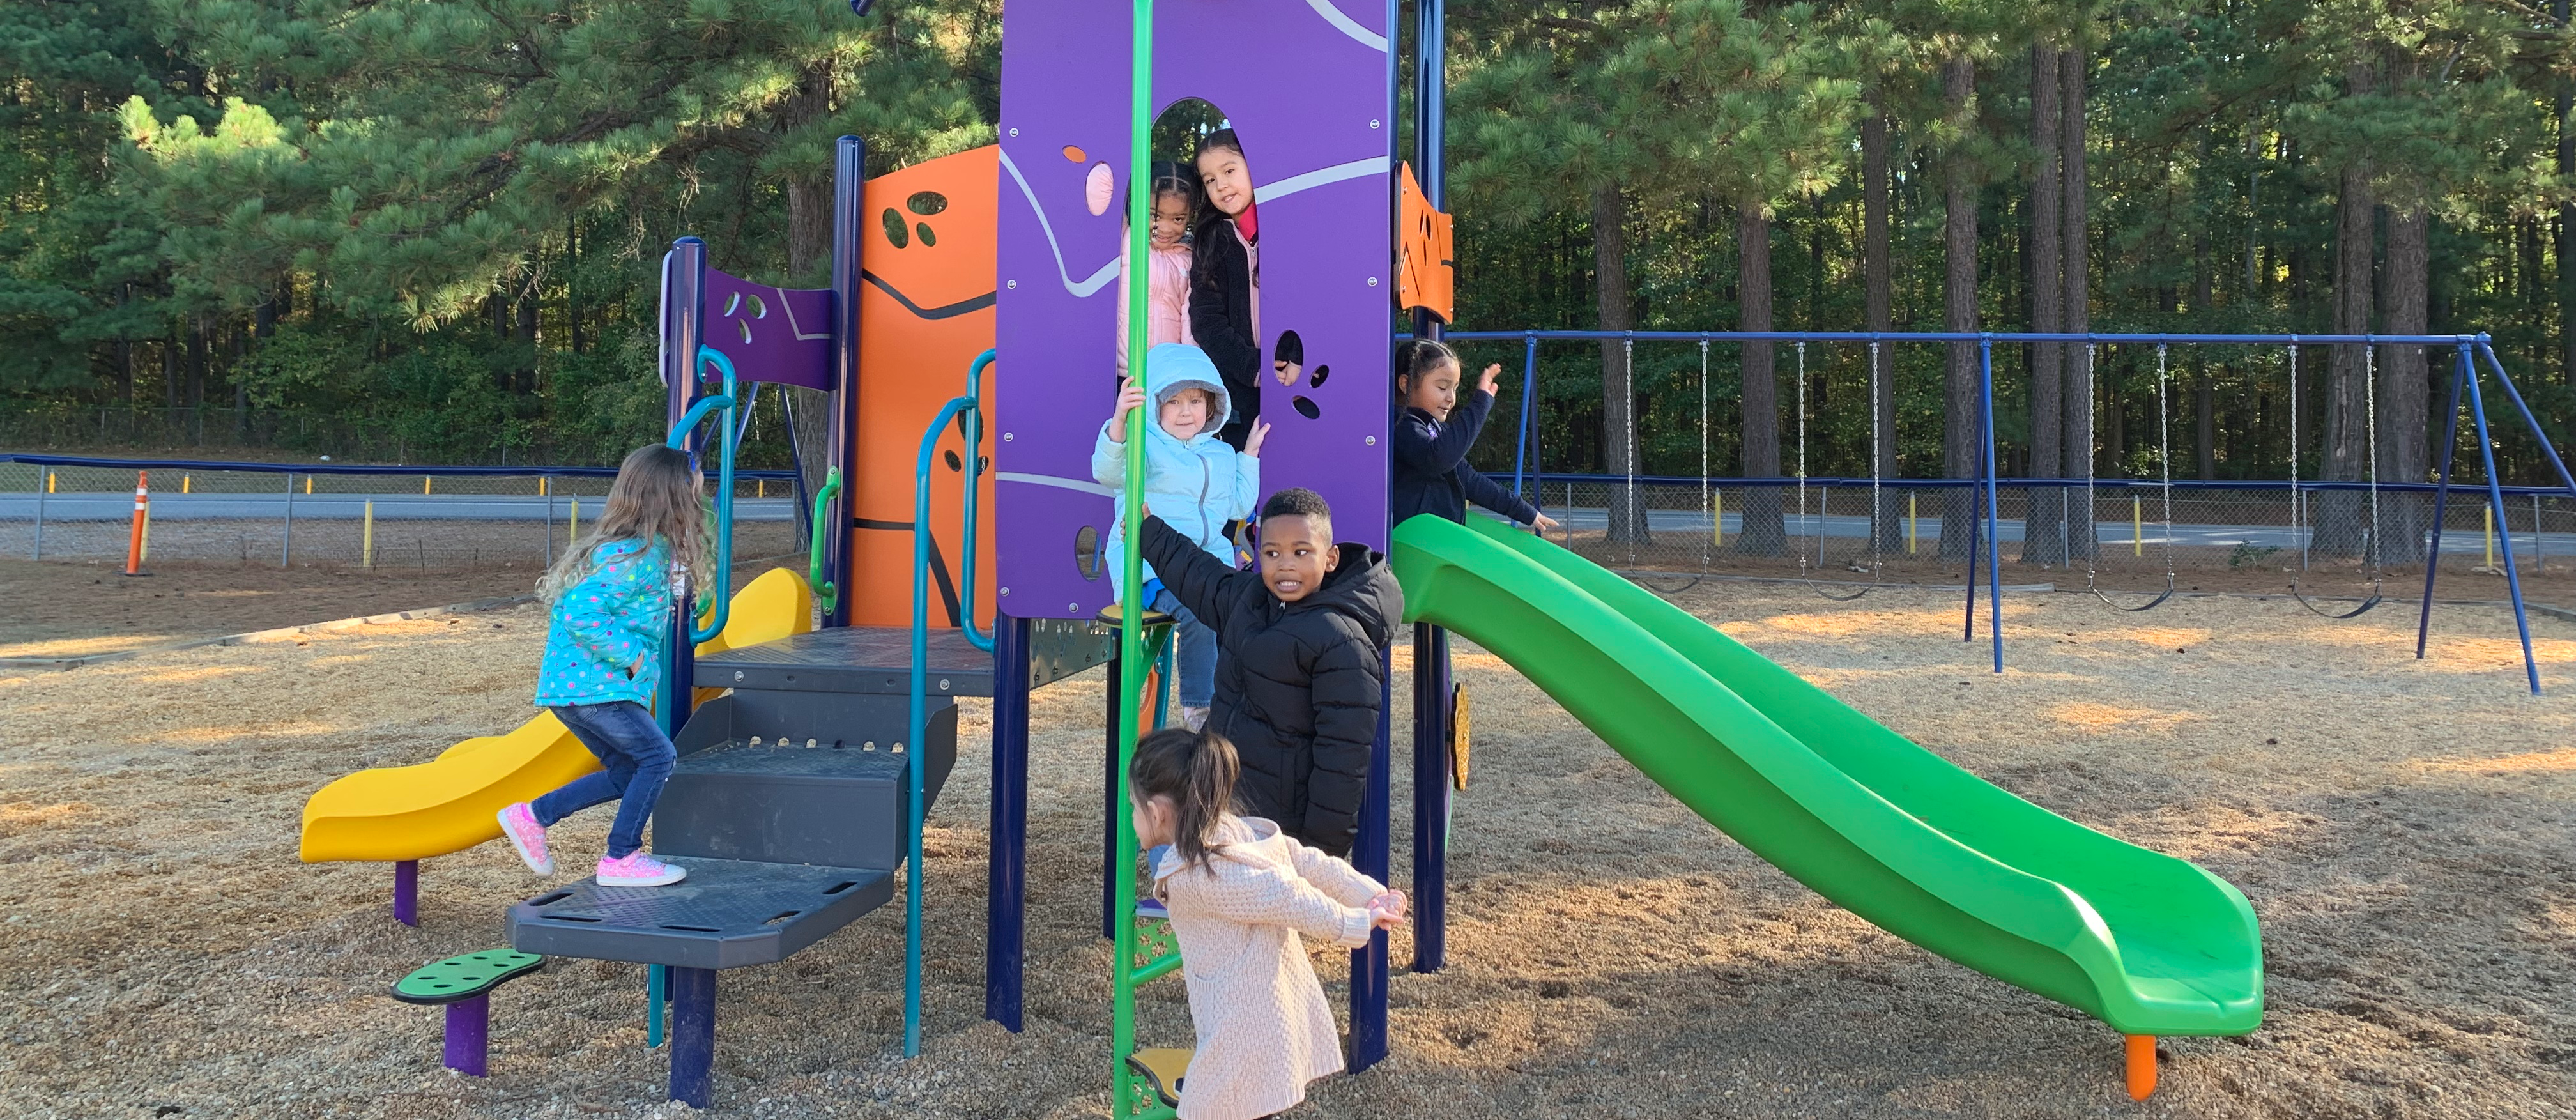 We love our playground!